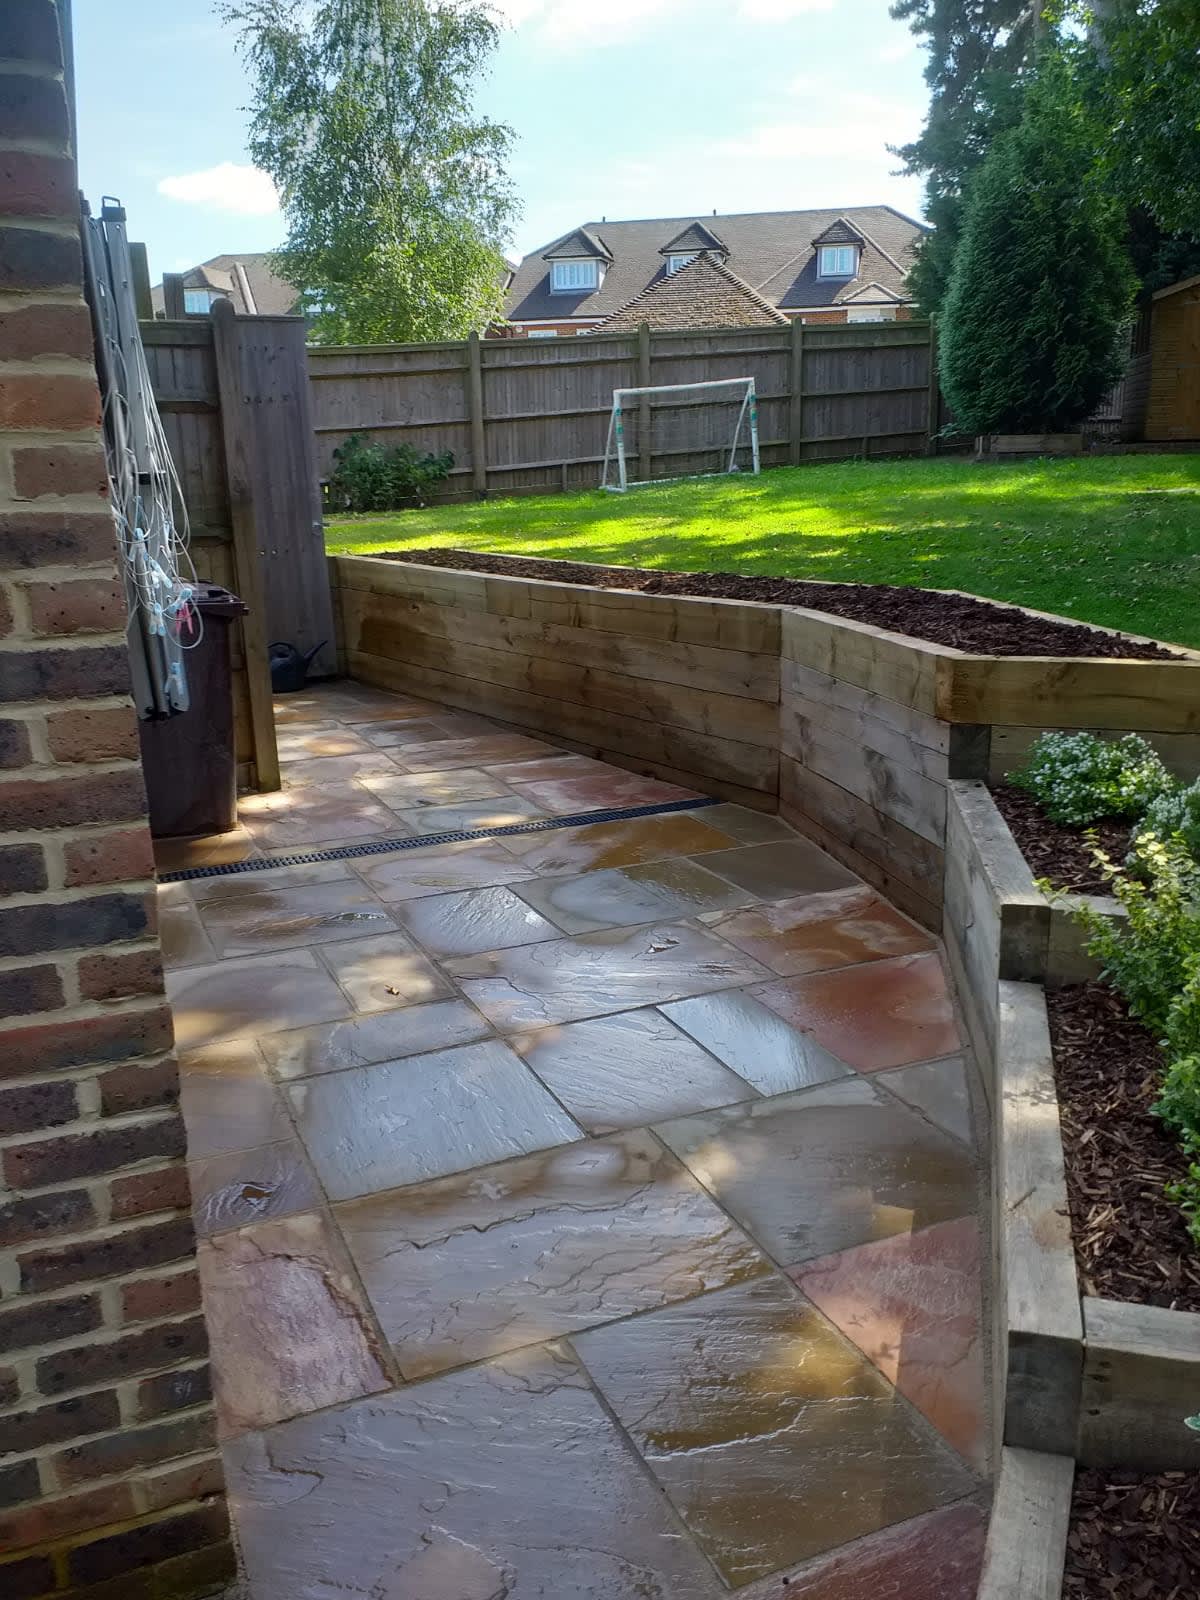 Digweed Landscapes Eastleigh 07769 619937